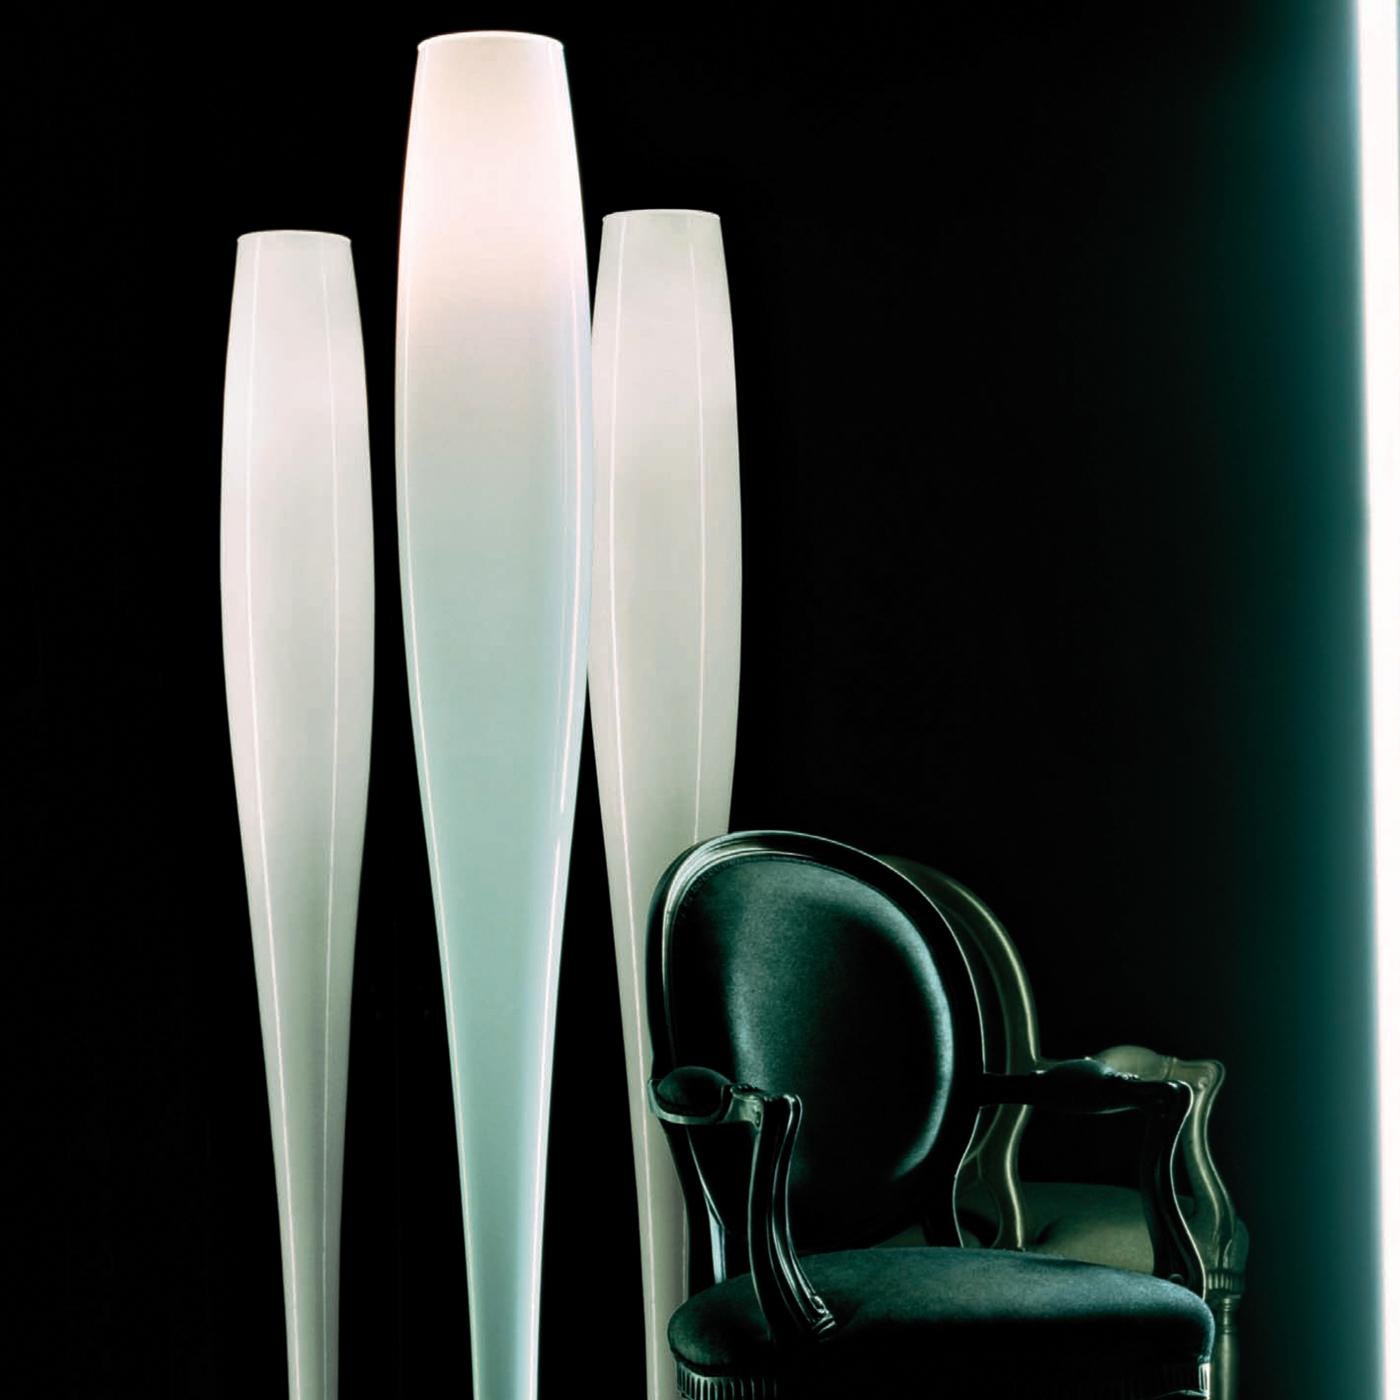 This floor lamp's simple geometry and organic shape deliver a striking allure and will enliven a modern interior with its soft light. Featuring an elongated shape that enlarges towards the top, the milky white diffuser of hand-blown Murano glass